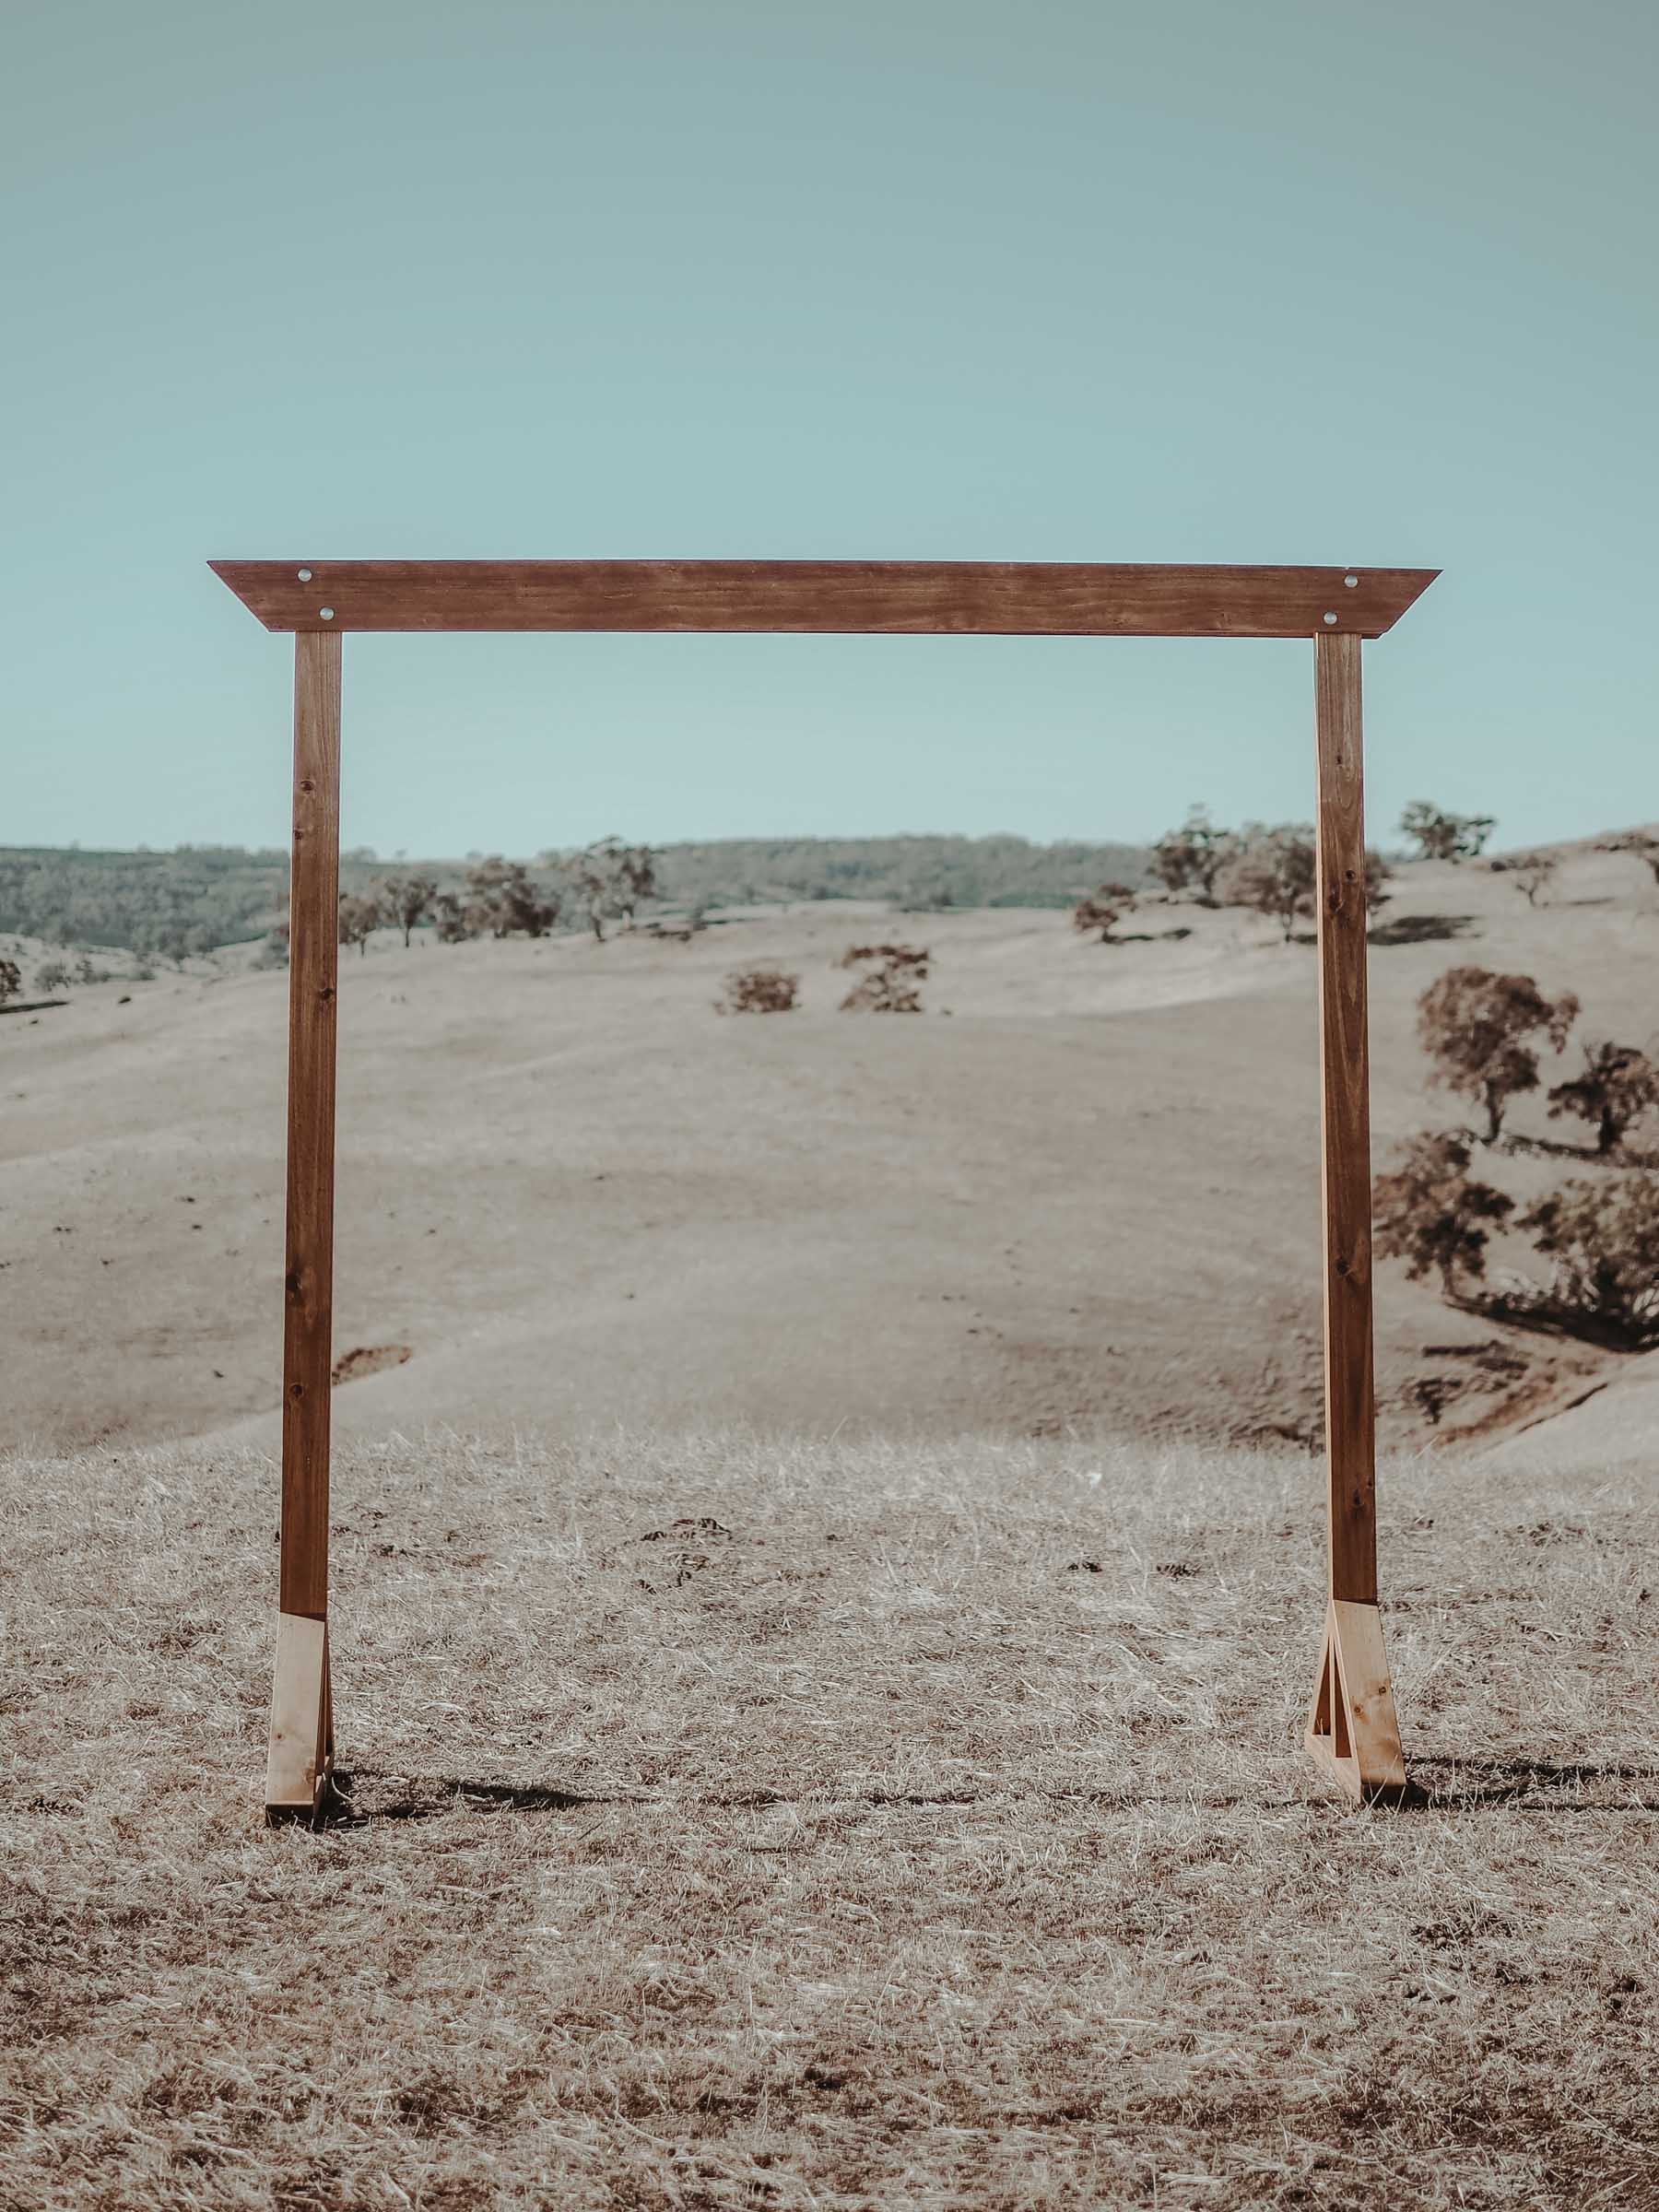 Rustic wooden arbour for backdrop